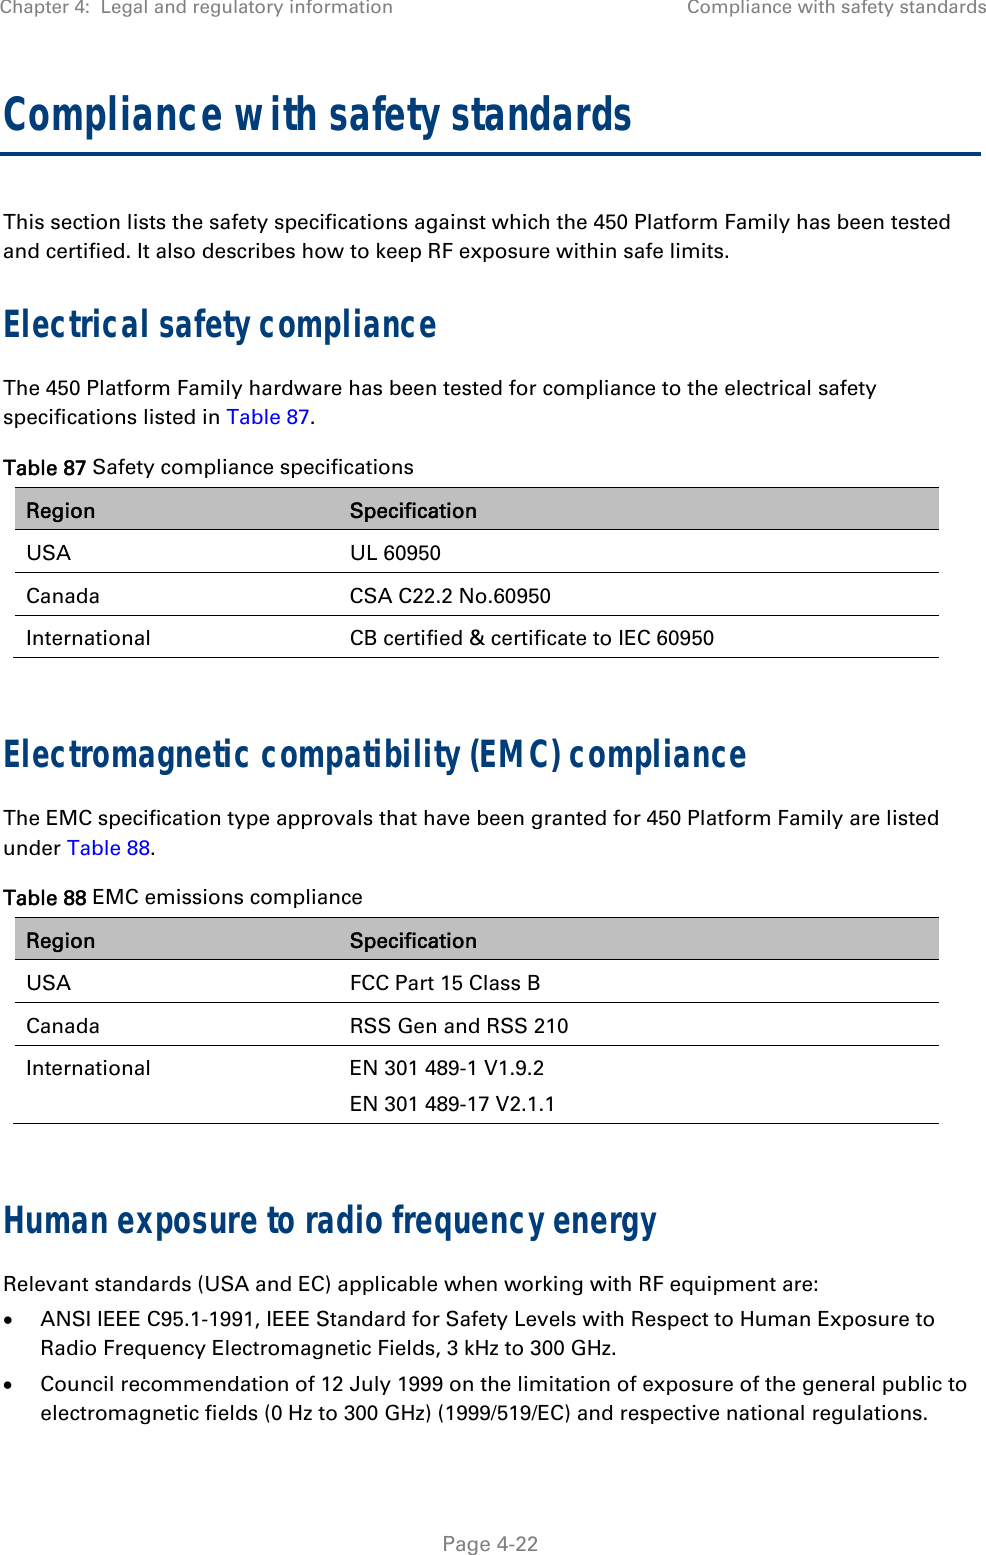 Chapter 4:  Legal and regulatory information  Compliance with safety standards   Page 4-22 Compliance with safety standards This section lists the safety specifications against which the 450 Platform Family has been tested and certified. It also describes how to keep RF exposure within safe limits. Electrical safety compliance  The 450 Platform Family hardware has been tested for compliance to the electrical safety specifications listed in Table 87. Table 87 Safety compliance specifications Region  Specification USA UL 60950 Canada  CSA C22.2 No.60950 International  CB certified &amp; certificate to IEC 60950  Electromagnetic compatibility (EMC) compliance The EMC specification type approvals that have been granted for 450 Platform Family are listed under Table 88. Table 88 EMC emissions compliance Region  Specification USA  FCC Part 15 Class B Canada  RSS Gen and RSS 210 International  EN 301 489-1 V1.9.2 EN 301 489-17 V2.1.1  Human exposure to radio frequency energy Relevant standards (USA and EC) applicable when working with RF equipment are:  ANSI IEEE C95.1-1991, IEEE Standard for Safety Levels with Respect to Human Exposure to Radio Frequency Electromagnetic Fields, 3 kHz to 300 GHz.  Council recommendation of 12 July 1999 on the limitation of exposure of the general public to electromagnetic fields (0 Hz to 300 GHz) (1999/519/EC) and respective national regulations. 